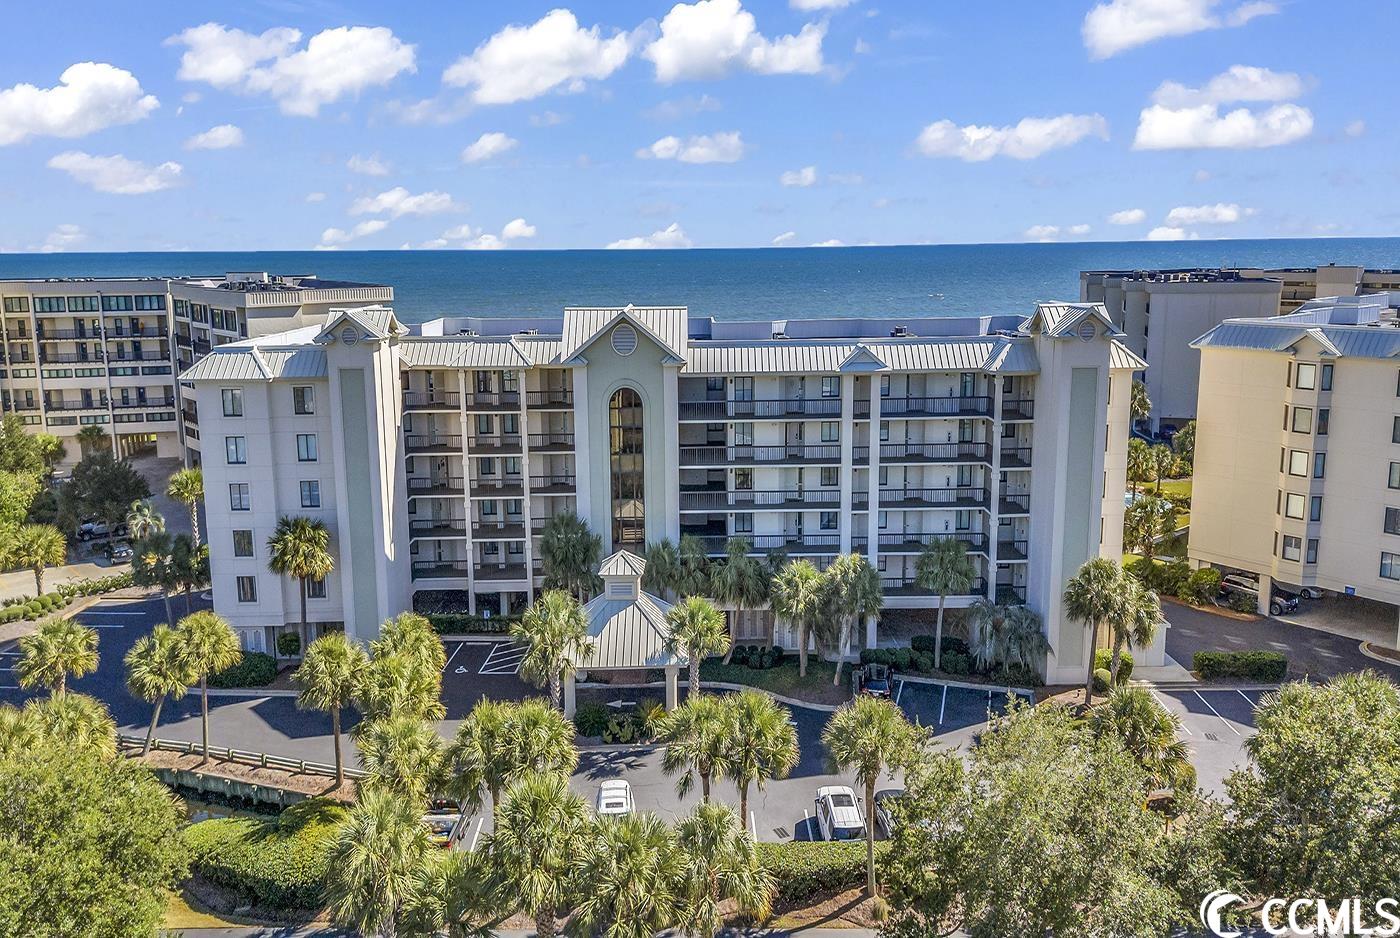 don't miss out on this beautiful 3 bed, 3 bath fully furnished, oceanfront condo in sandpiper run crescent building. featuring an open floor plan that is perfect for family get togethers, a charming kitchen with lots of counter & cabinet space and a large balcony to enjoy all the beautiful sunrises and relaxing in the evenings. the master bedroom has a great view of the atlantic and its own separate entry to the balcony. litchfield by the sea offers a unique lifestyle built around beach activities, tennis, golf, a private water park, walking, fishing, crabbing, and biking and hiking paths which extend through miles of marshlands. just a few miles from brookgreen gardens & huntington beach state park and only a short drive to the airport, shopping and dining & entertainment, golf courses & more. this is the perfect place to call home, vacation or to make an investment property!